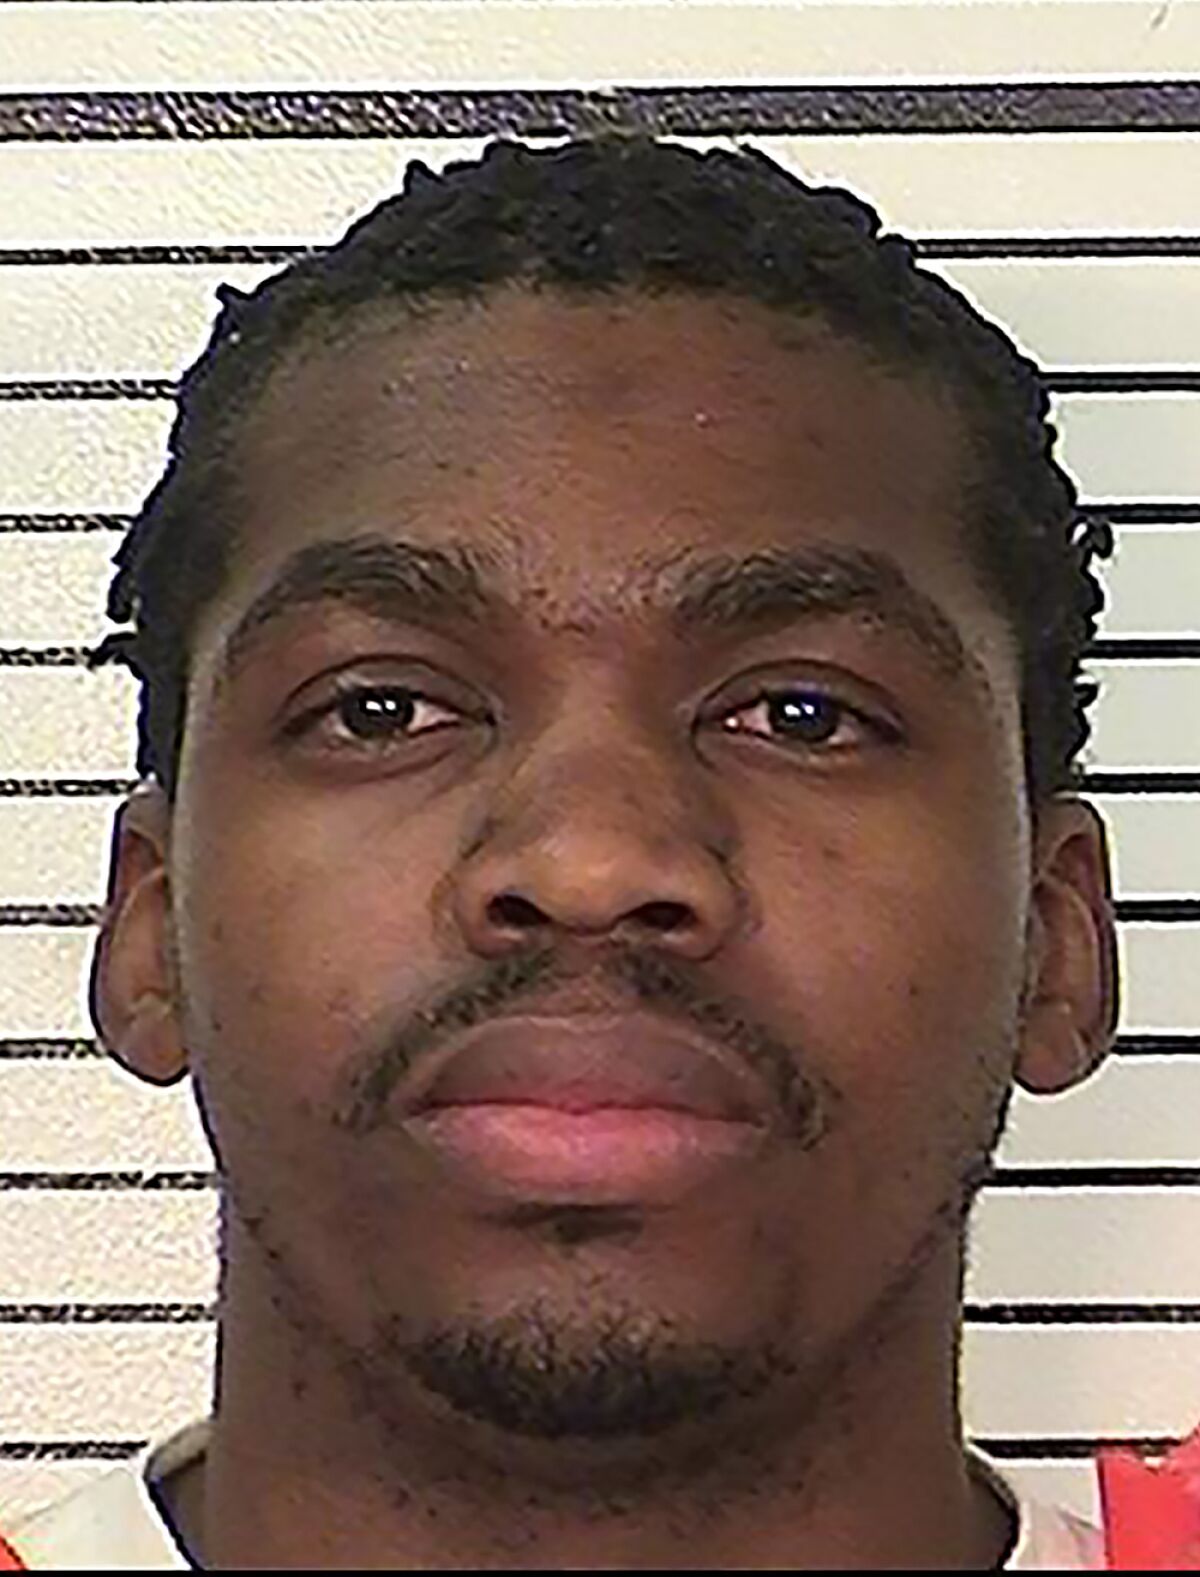 This March 28, 2017 photo provided by the California Department of Corrections and Rehabilitation shows Daryol Richmond. Richmond, is one of two California prison inmates who allegedly ran an unemployment scam that sought to defraud the California Economic Development Department of an estimated $25 million. (California Department of Corrections and Rehabilitation via AP)